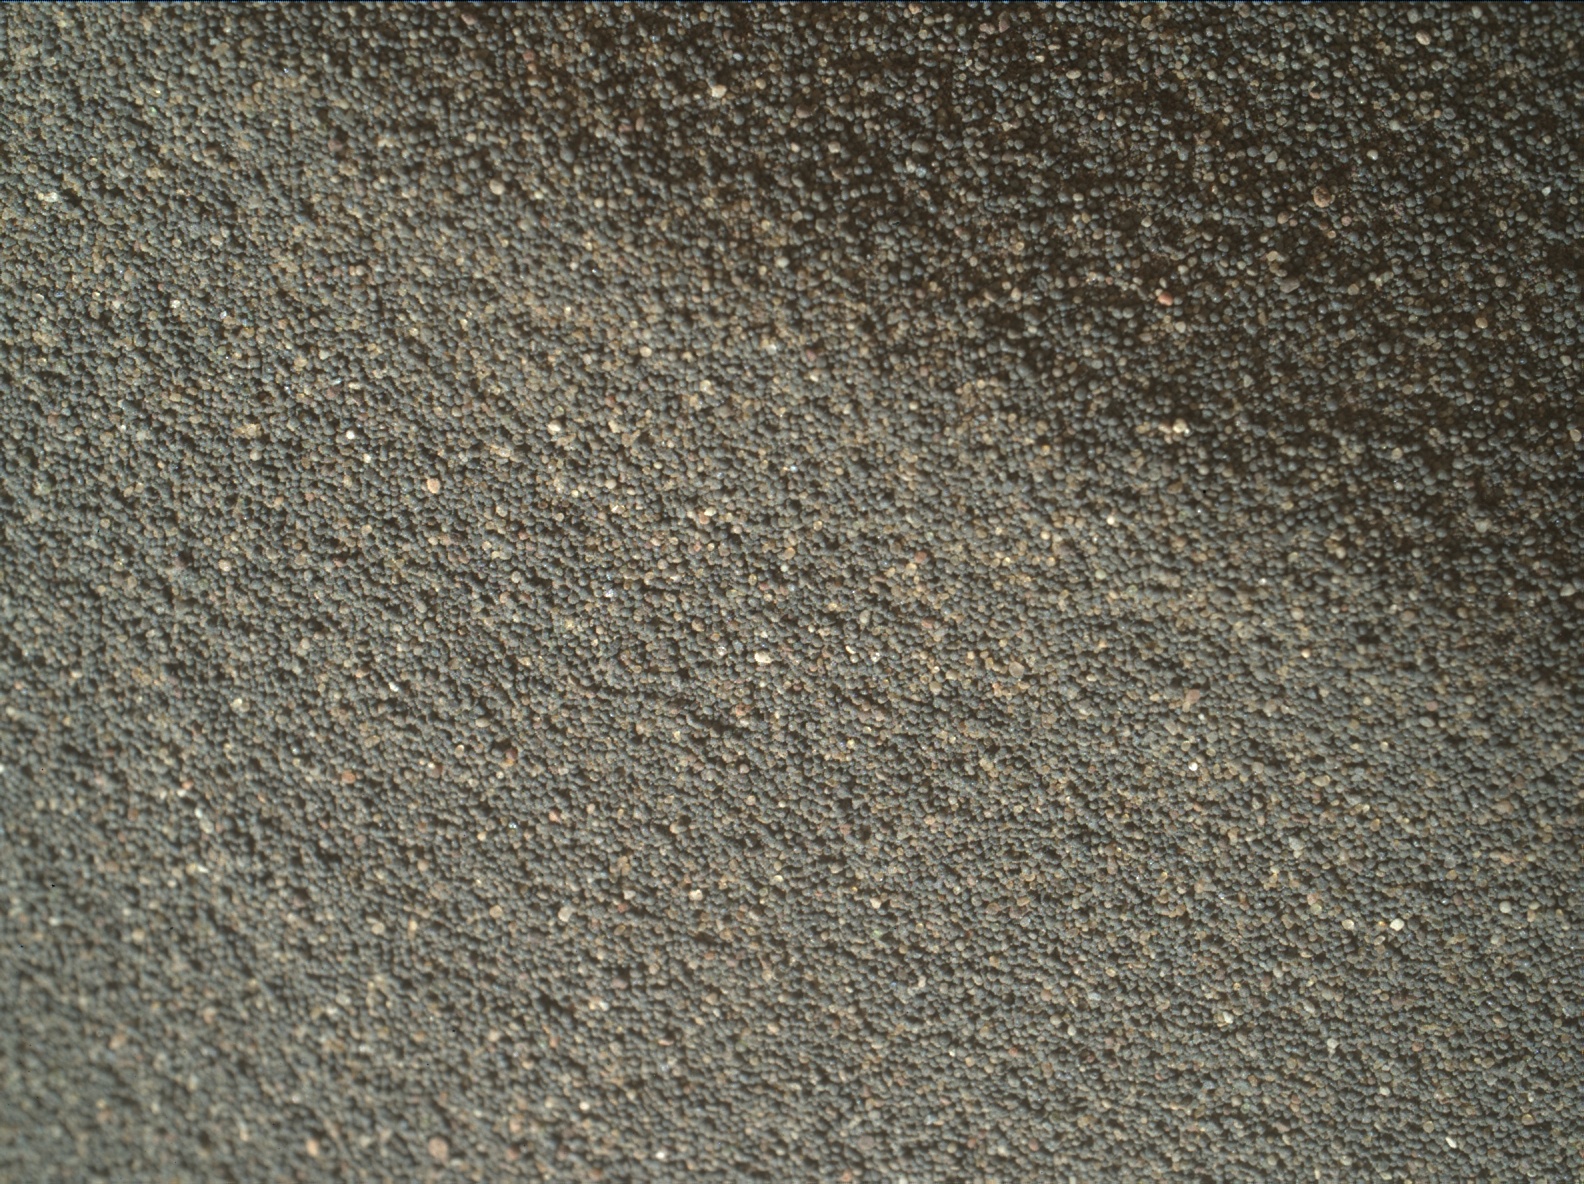 Nasa's Mars rover Curiosity acquired this image using its Mars Hand Lens Imager (MAHLI) on Sol 3078